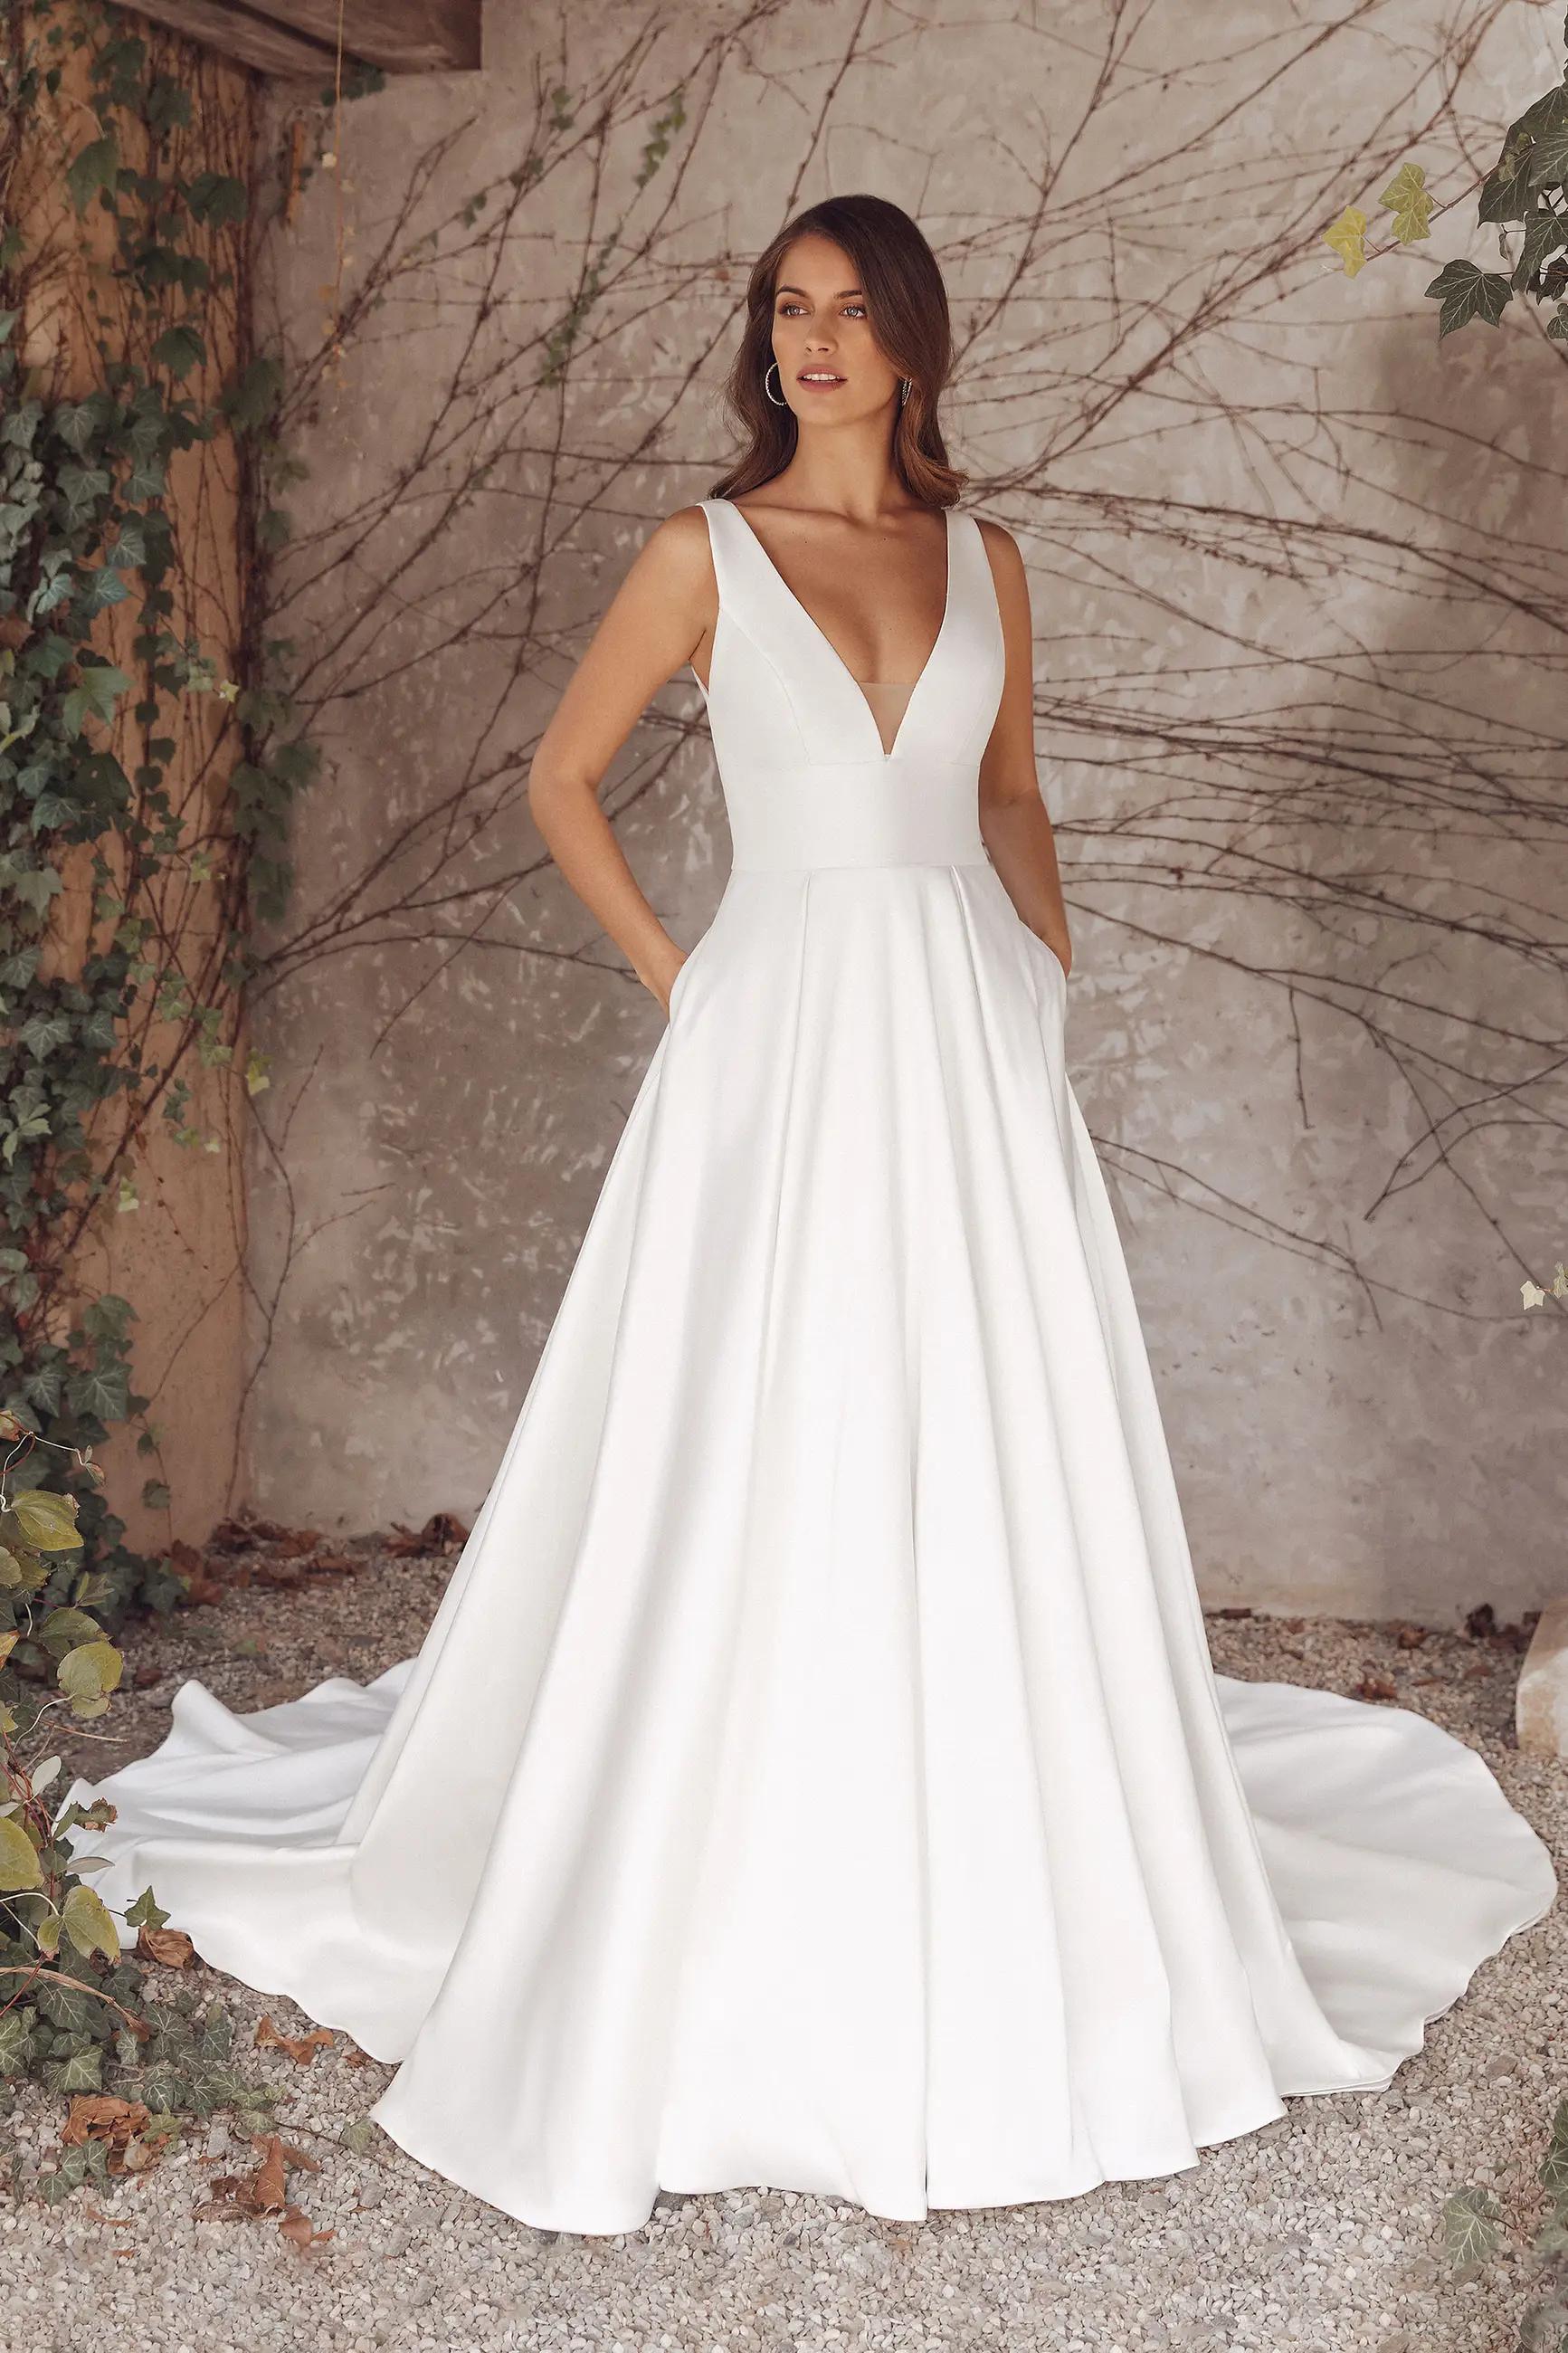 Minimalist Magic: Clean, Classic, and Chic Wedding Dresses for Modern Brides Image